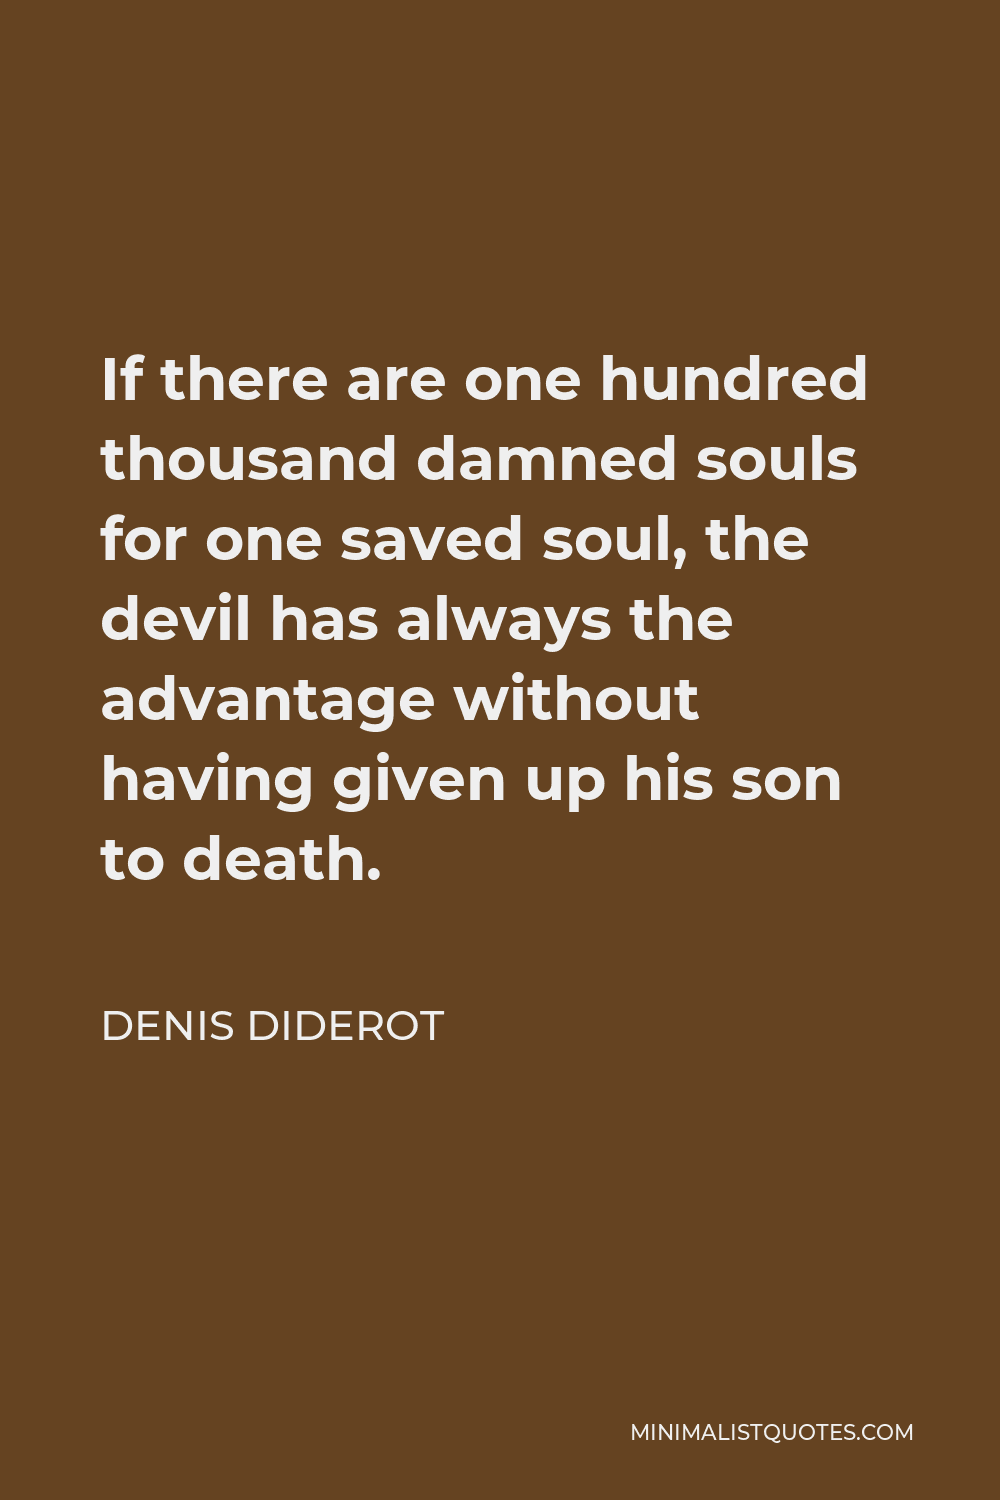 Denis Diderot Quote - If there are one hundred thousand damned souls for one saved soul, the devil has always the advantage without having given up his son to death.